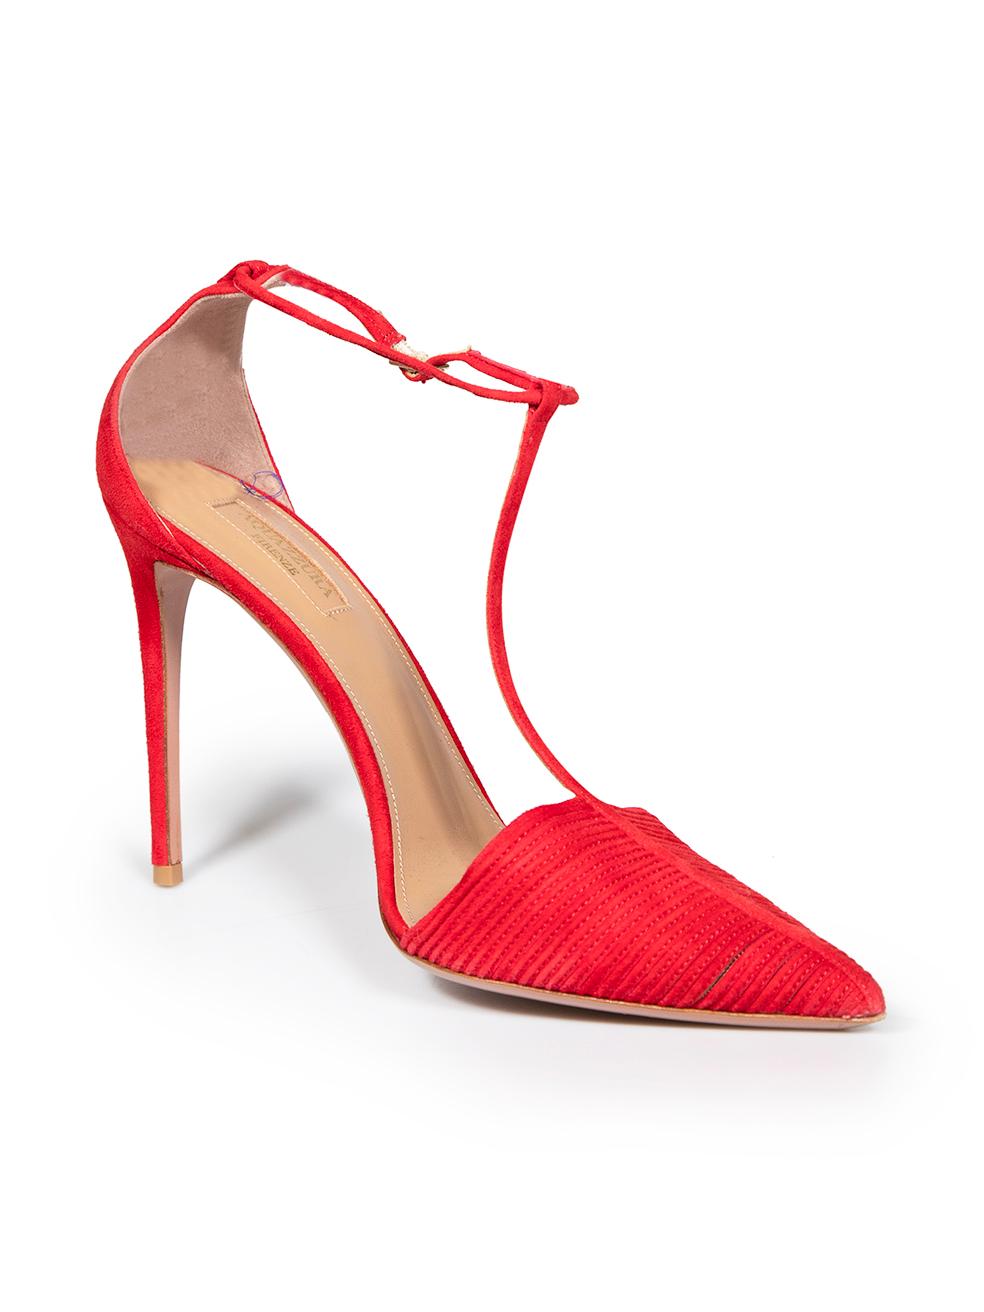 CONDITION is Very good. Minimal wear to heels is evident. Minimal wear to soles and some light abrasion to the pointed toe tips on this used Aquazzura designer resale item. This item comes with original dust bag.
 
 Details
 Red
 Suede
 Heels
 Point